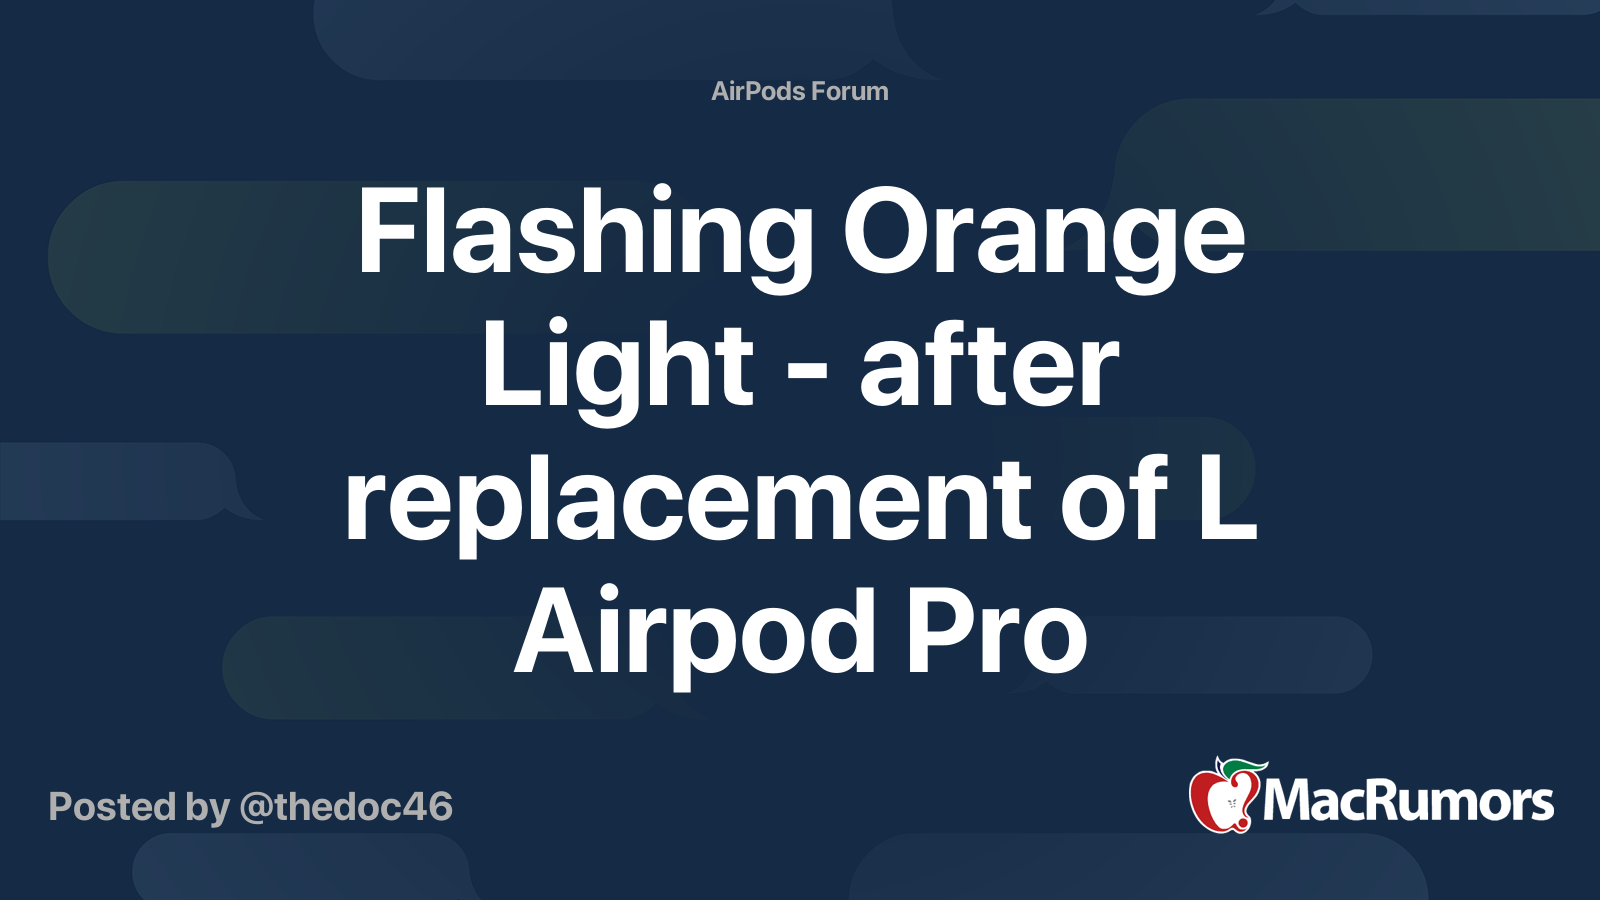 Udvalg Settlers legering Flashing Orange Light - after replacement of L Airpod Pro | MacRumors Forums